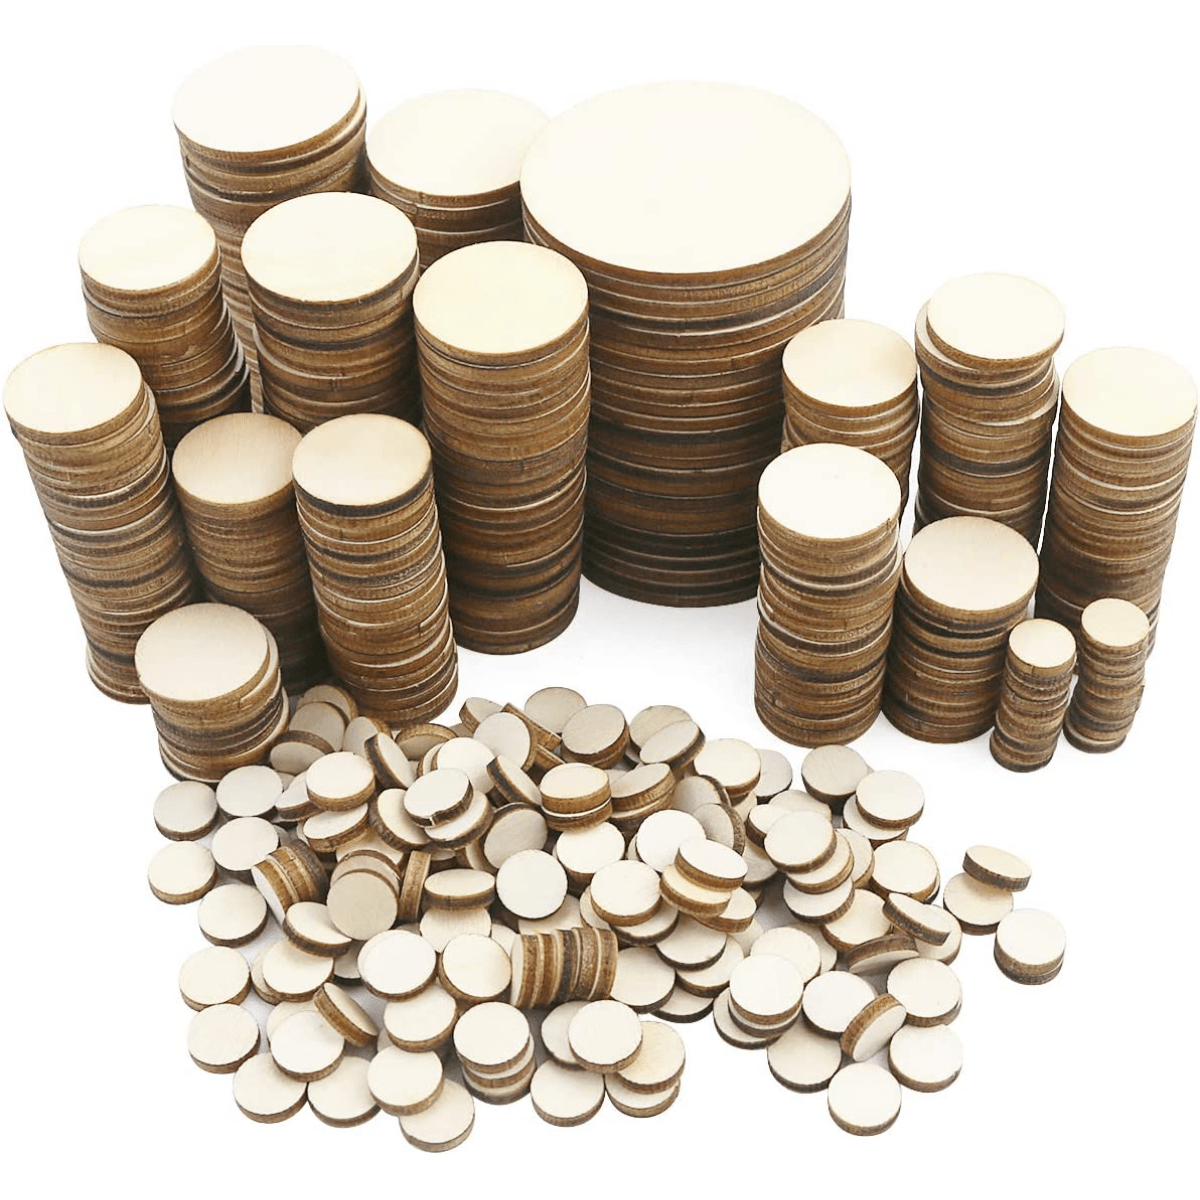 100 Wood Rounds and 100 Key Rings Wooden Circle Discs with Holes and Ring  Clips for Birthday Board Tags, Homemade DIY Gifts, Arts & Crafts (1 Inch)